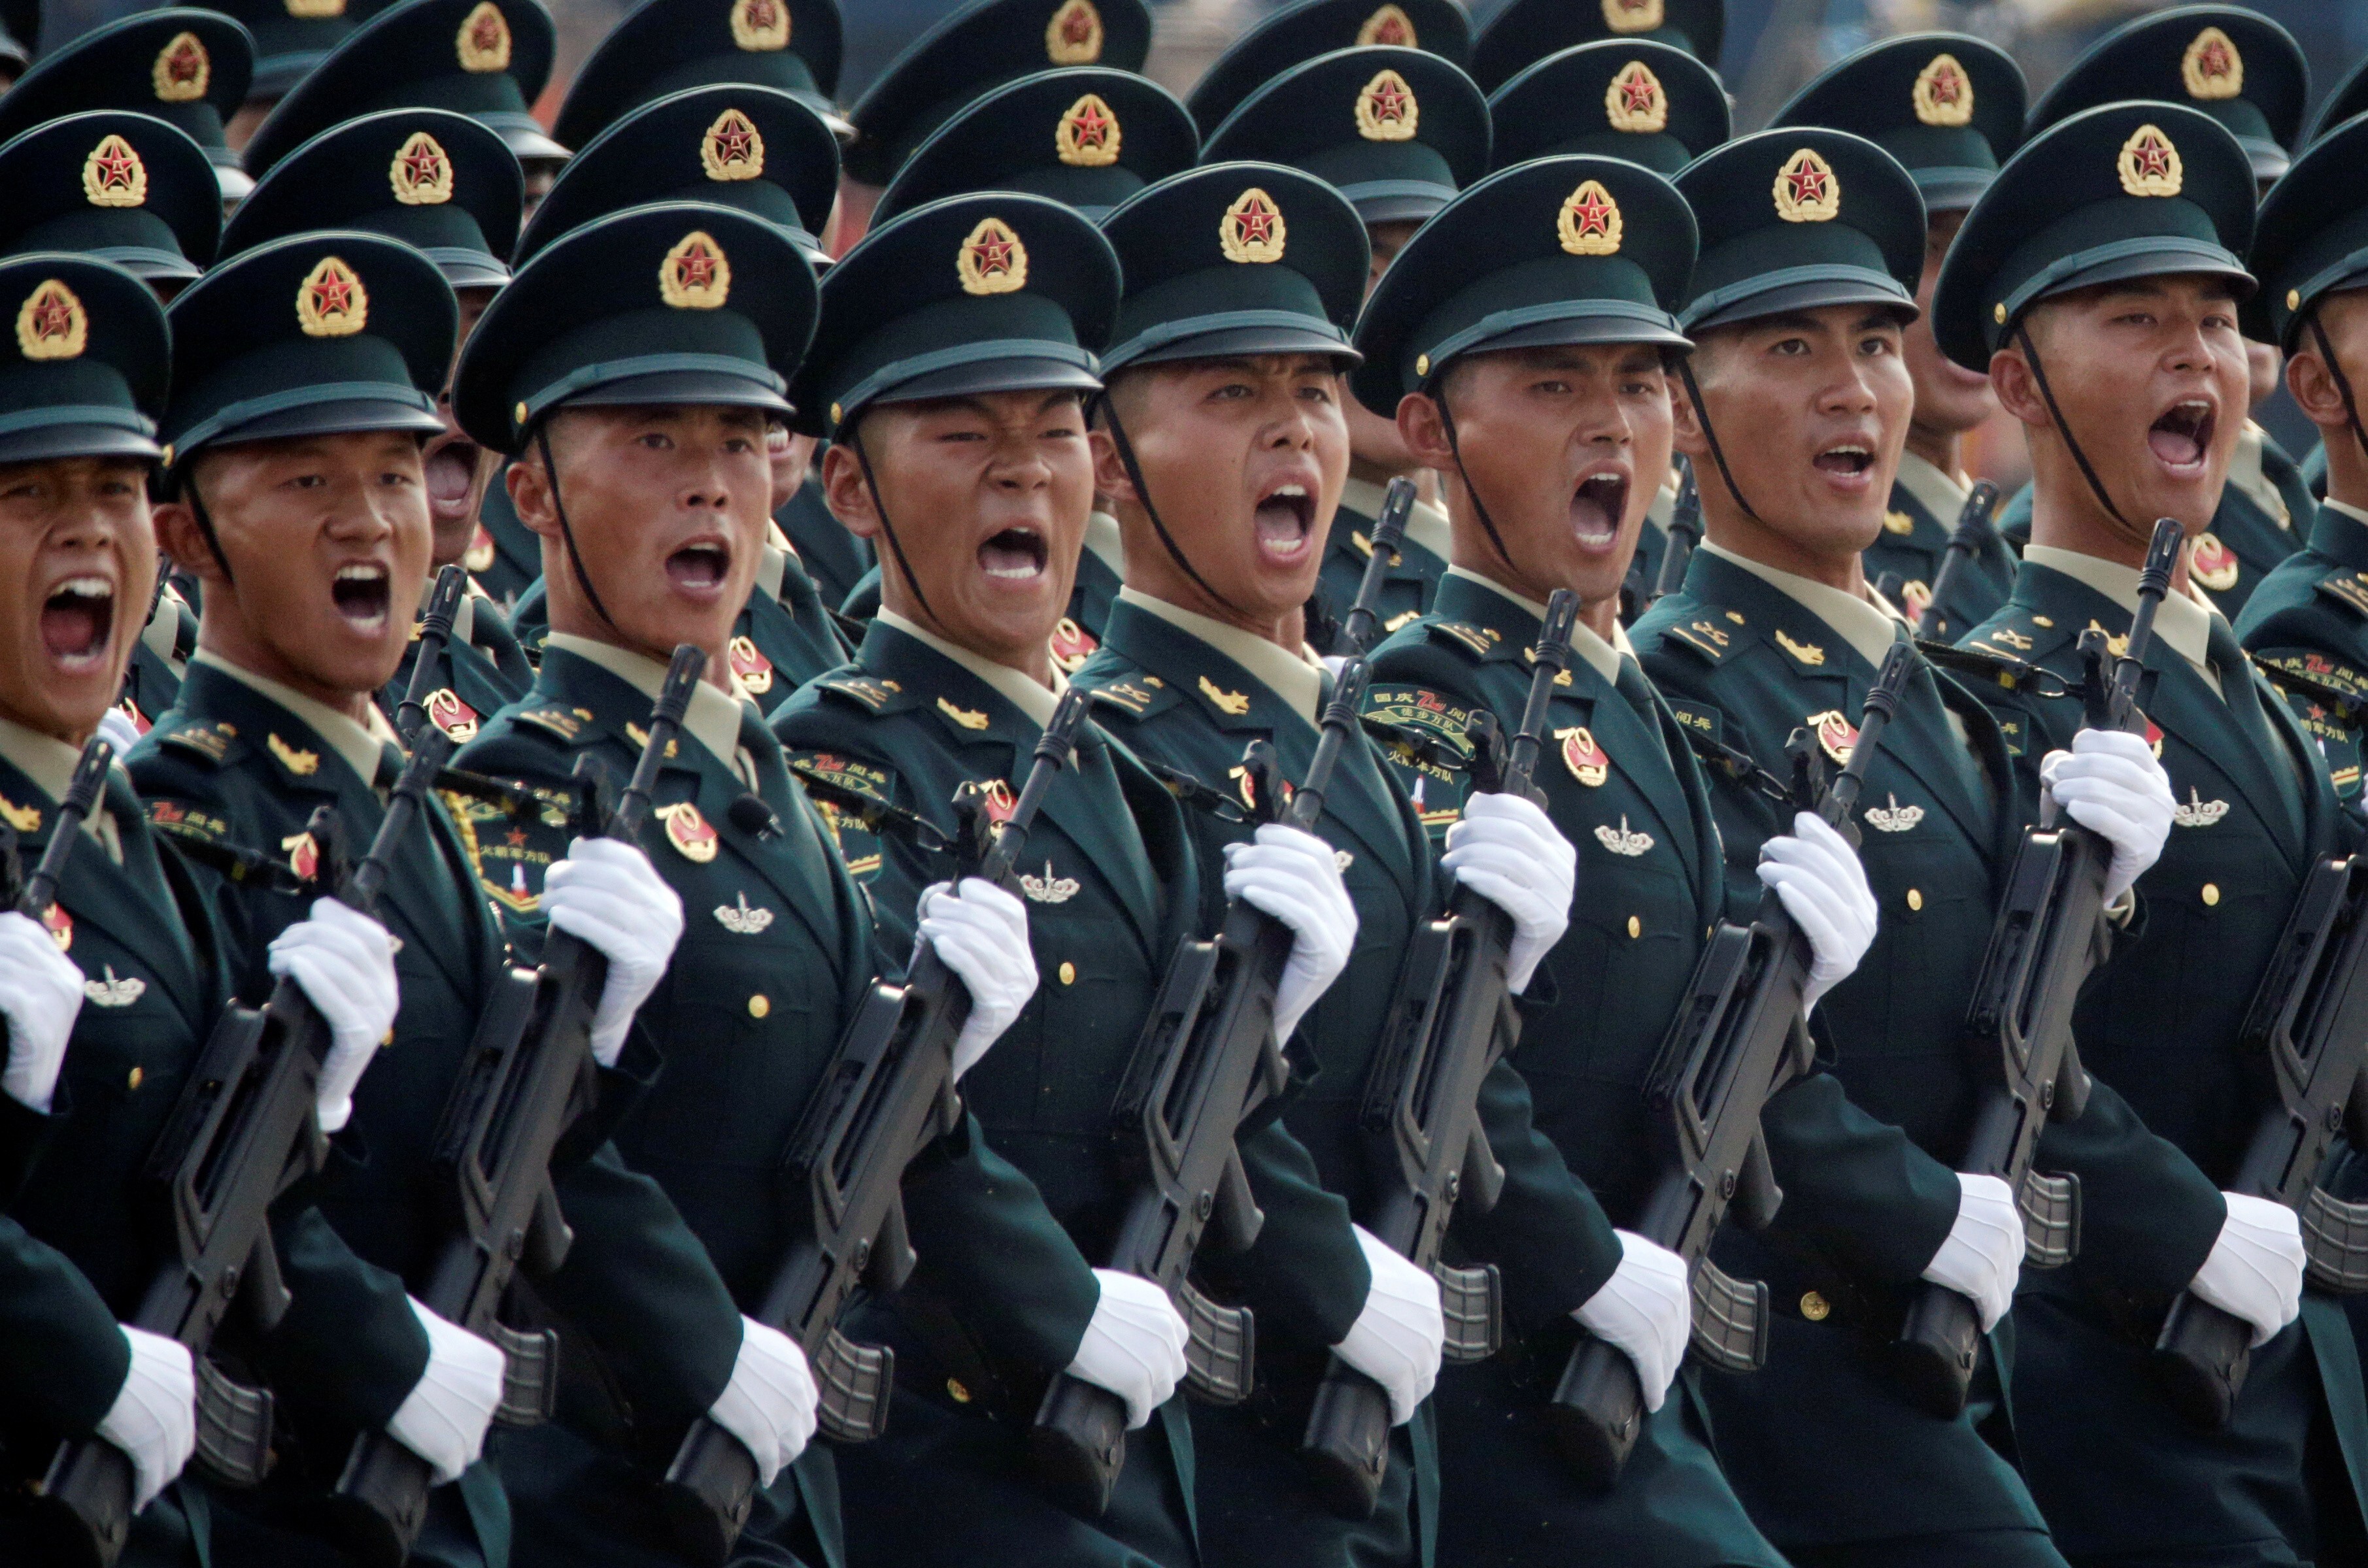 China’s military spending is the second highest in the world after the United States, according to a US report. Photo: Reuters